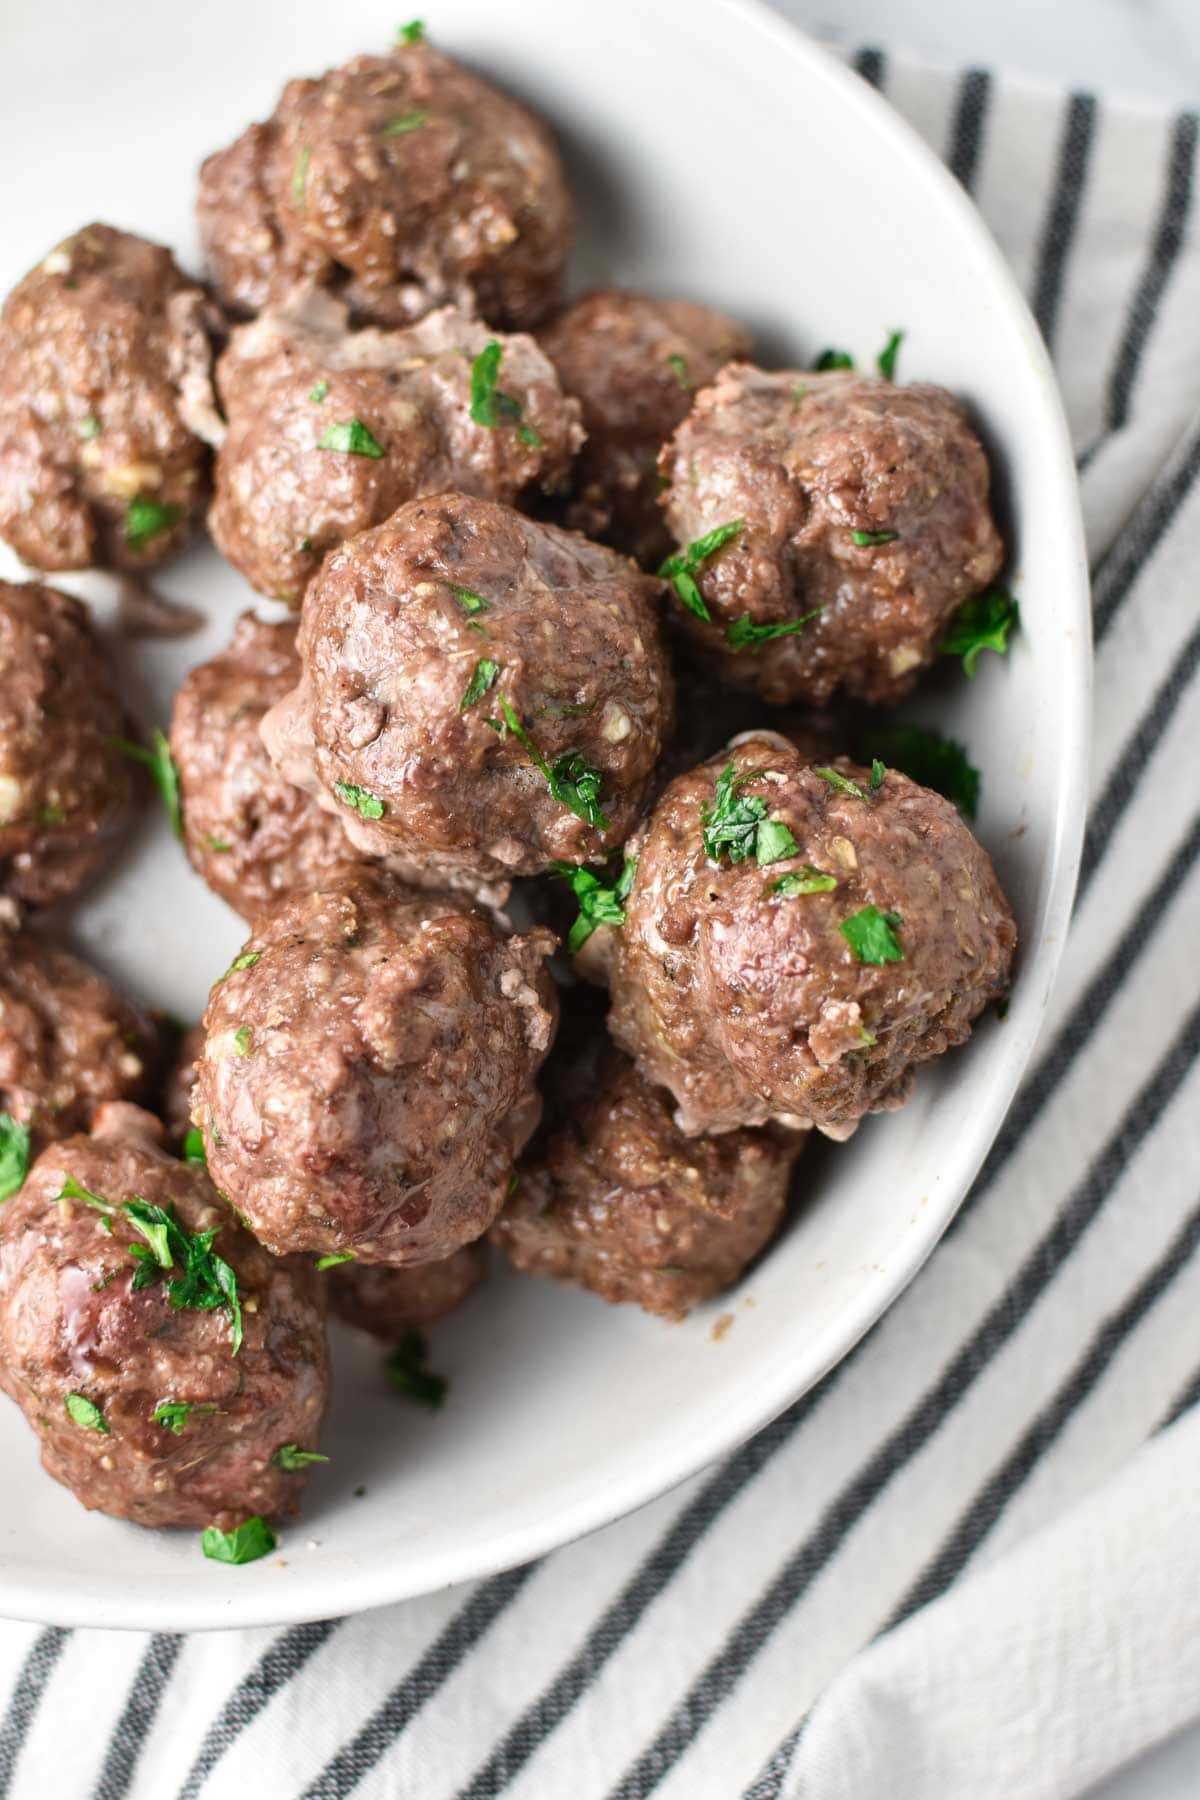 Cooked meatballs in a white bowl.